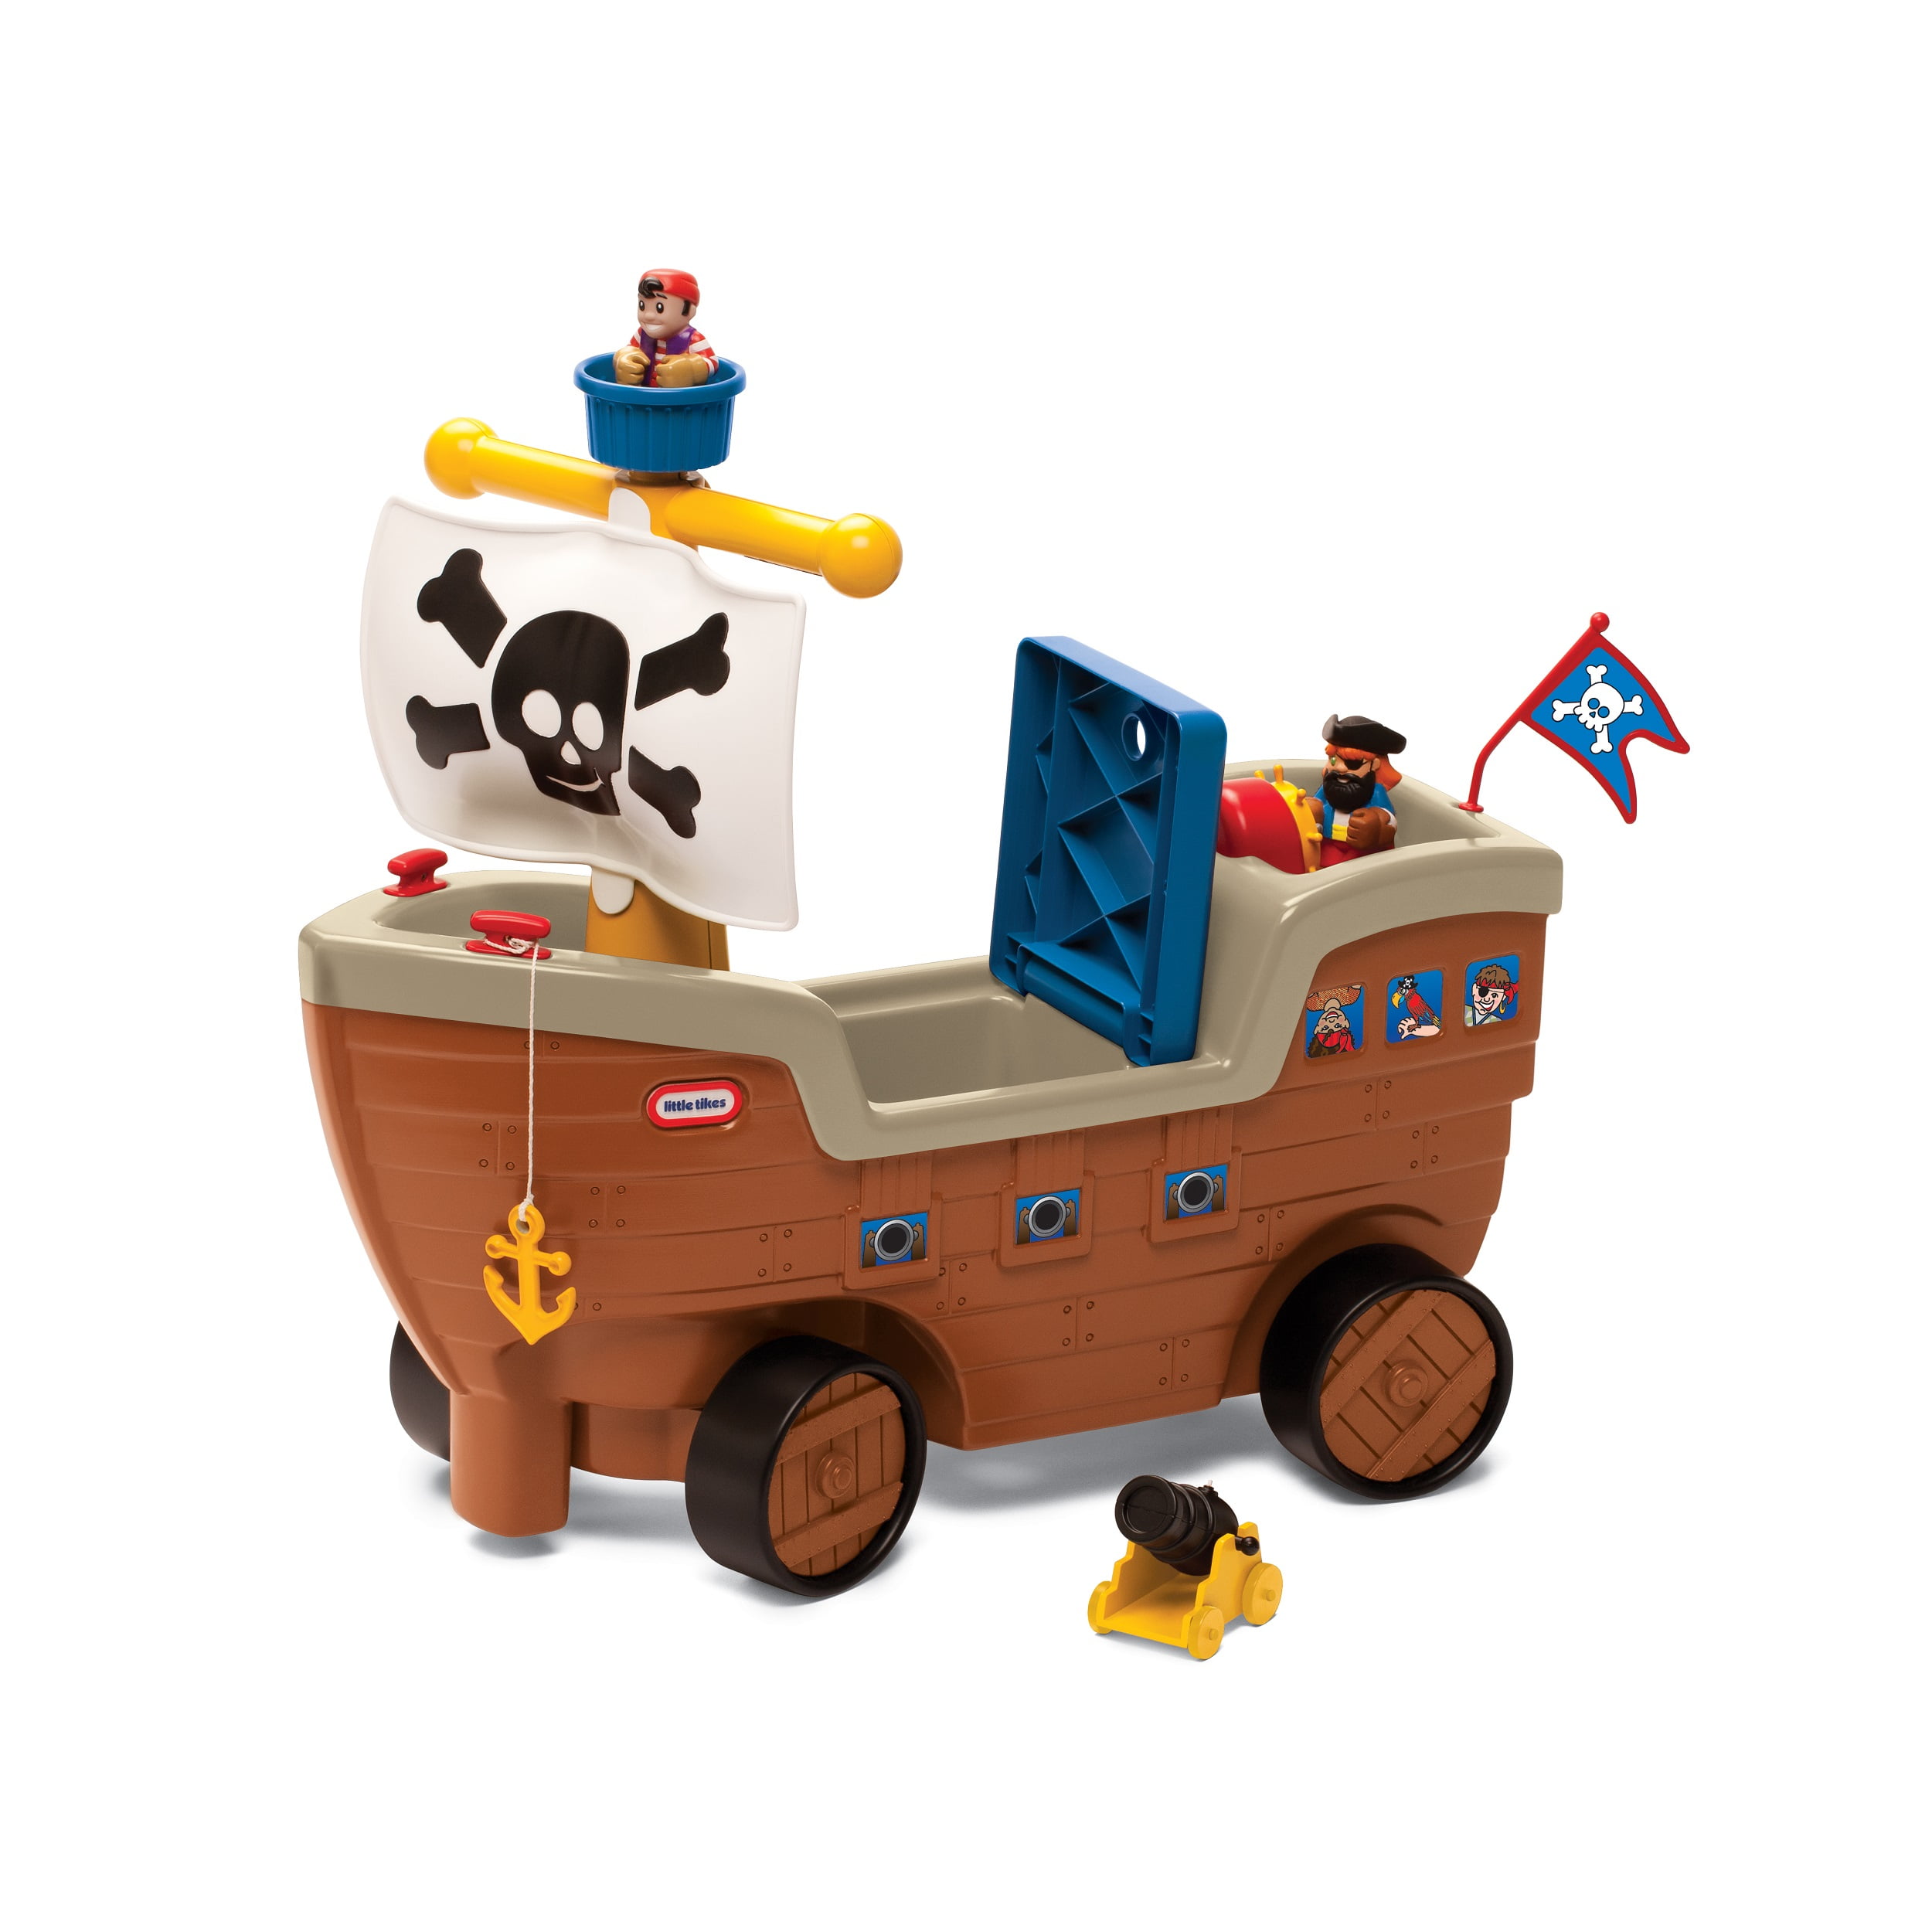 Photo 1 of *Loose hardware, may be incomplete*
Little Tikes Play 'n Scoot Pirate Ship